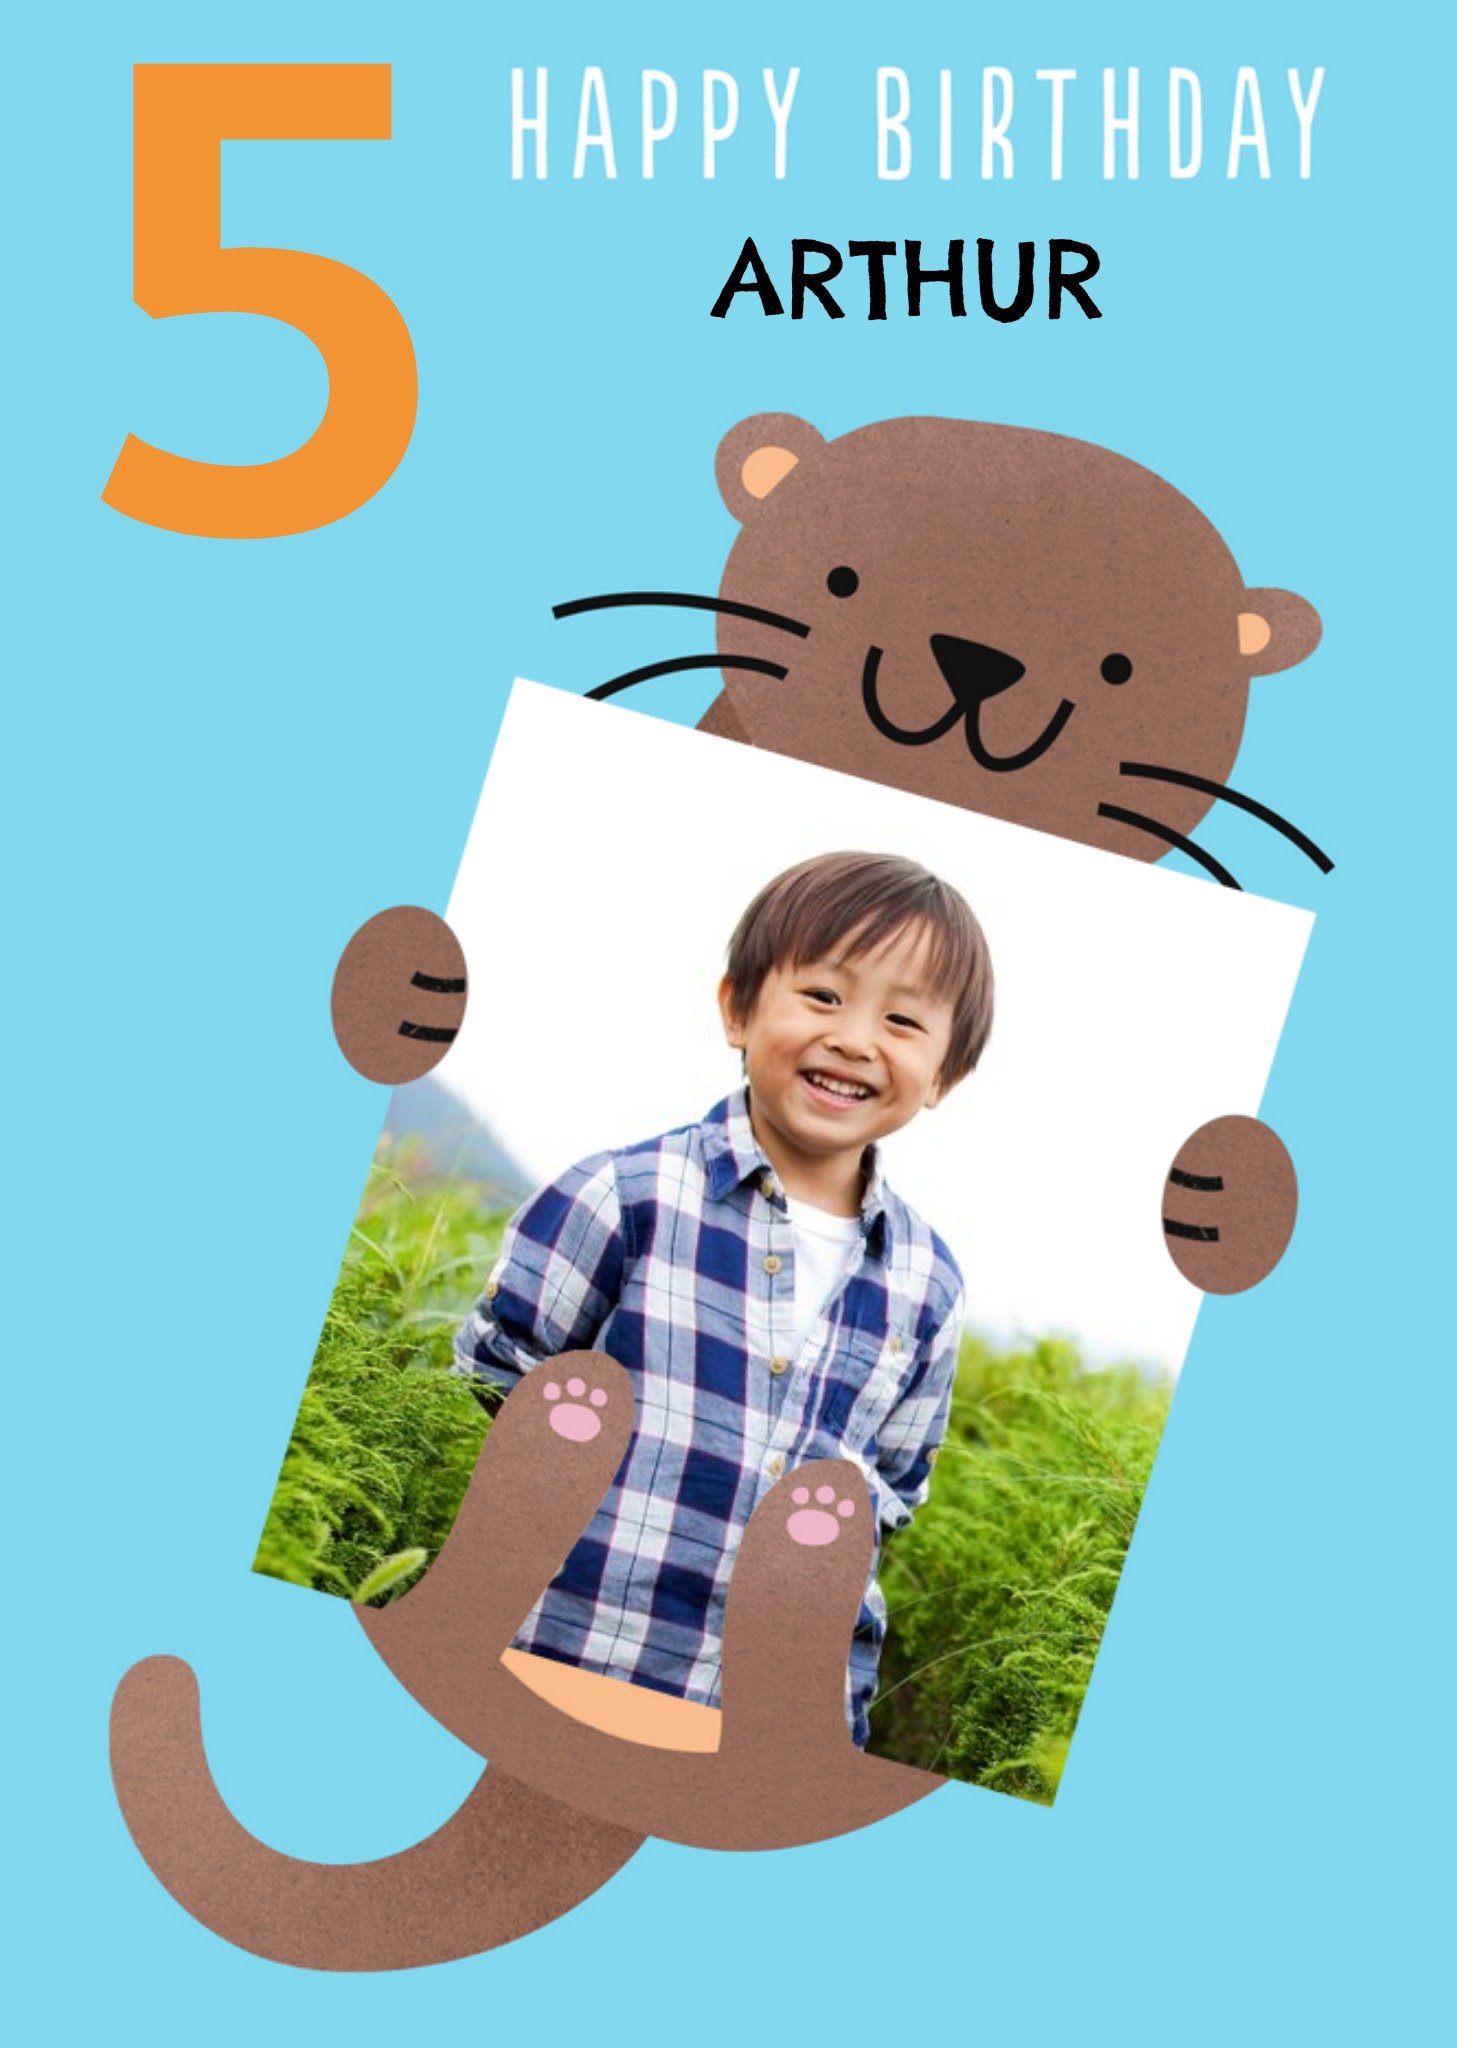 Moonpig Cute Simple Illustration Of An Otter Happy 5th Birthday Photo Upload Card, Large